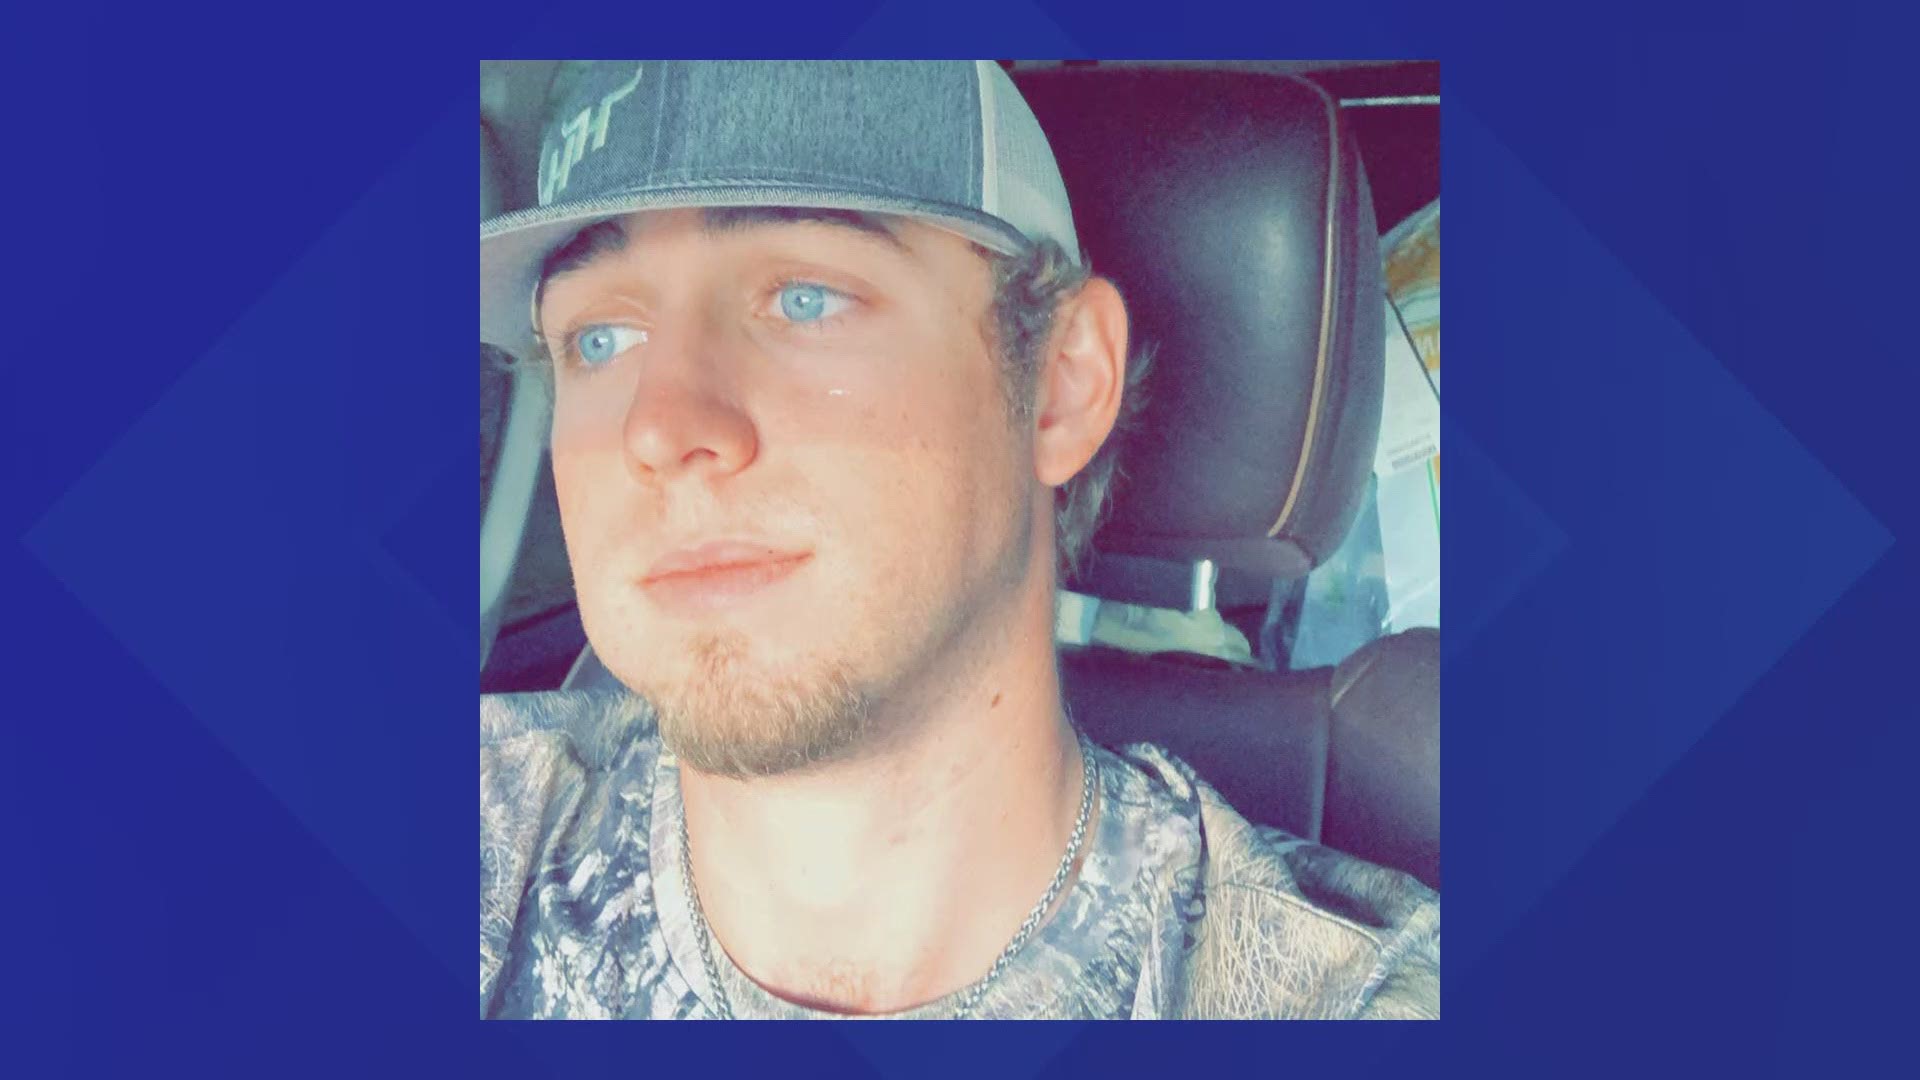 The missing boater has been identified as 24-year-old Jacob Langley, EquuSearch officials confirmed.